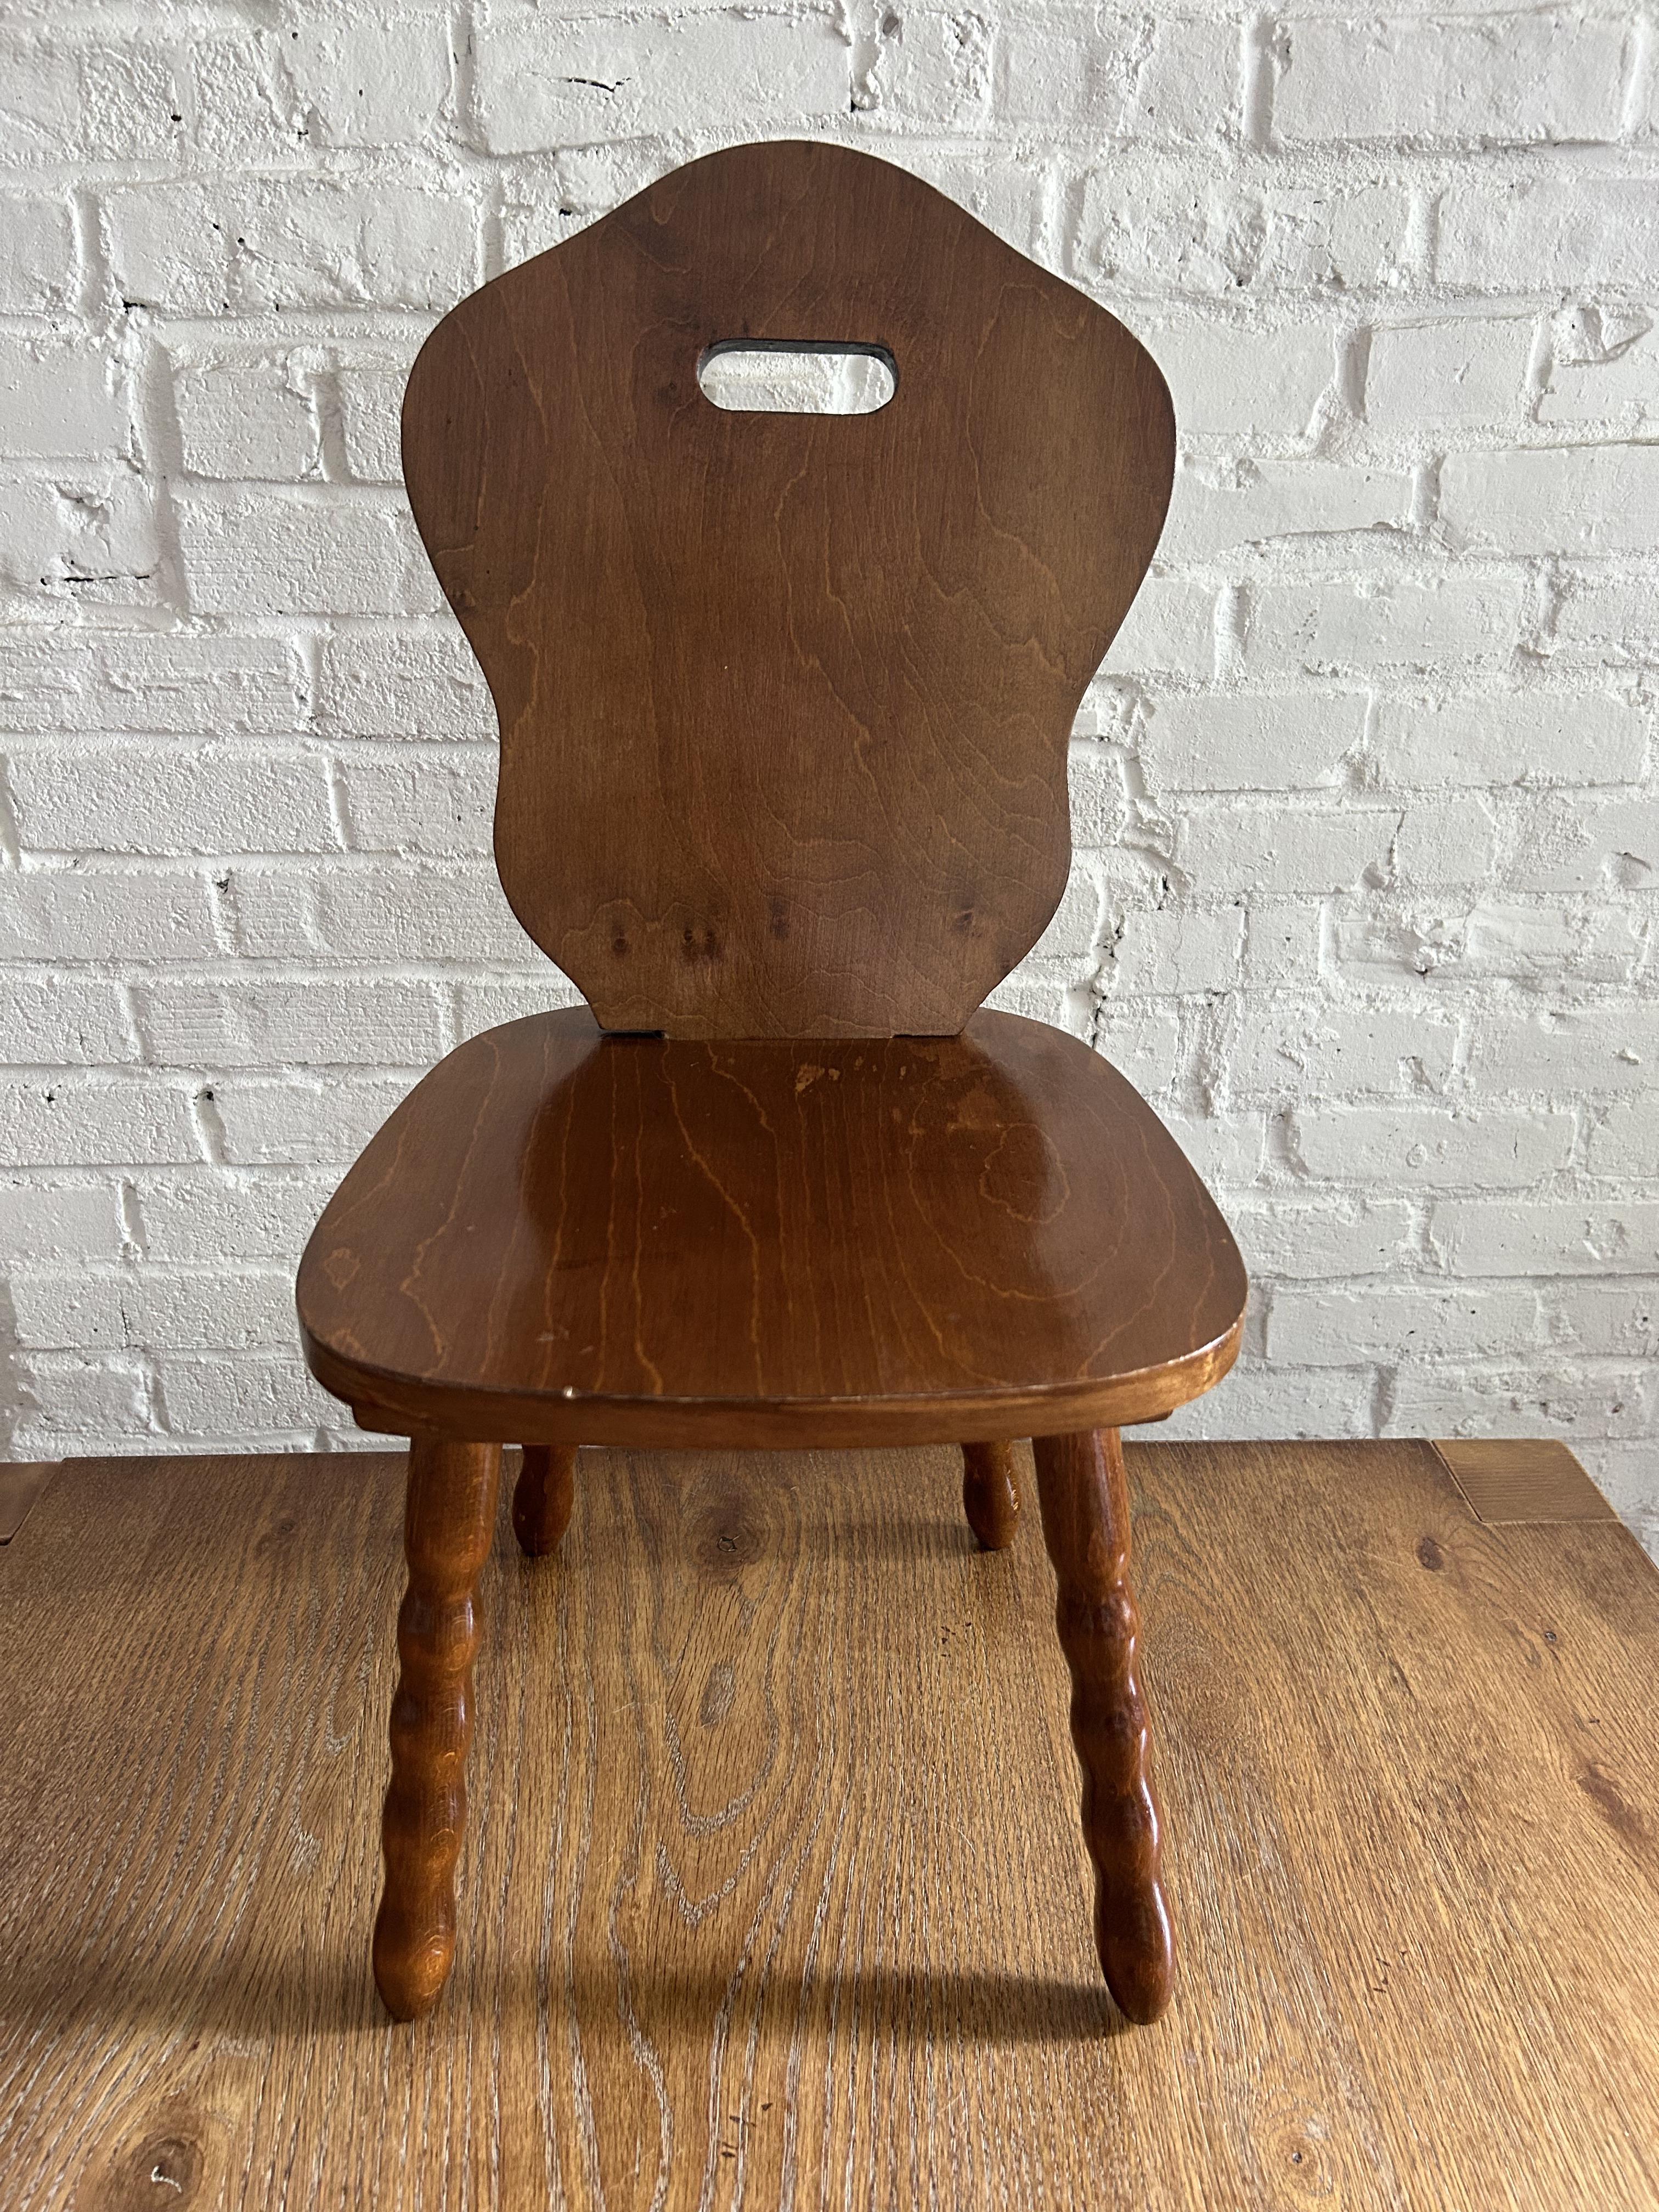 1960s Solid Wood Decorative Stool / Children's Chair, Made in Romania 2